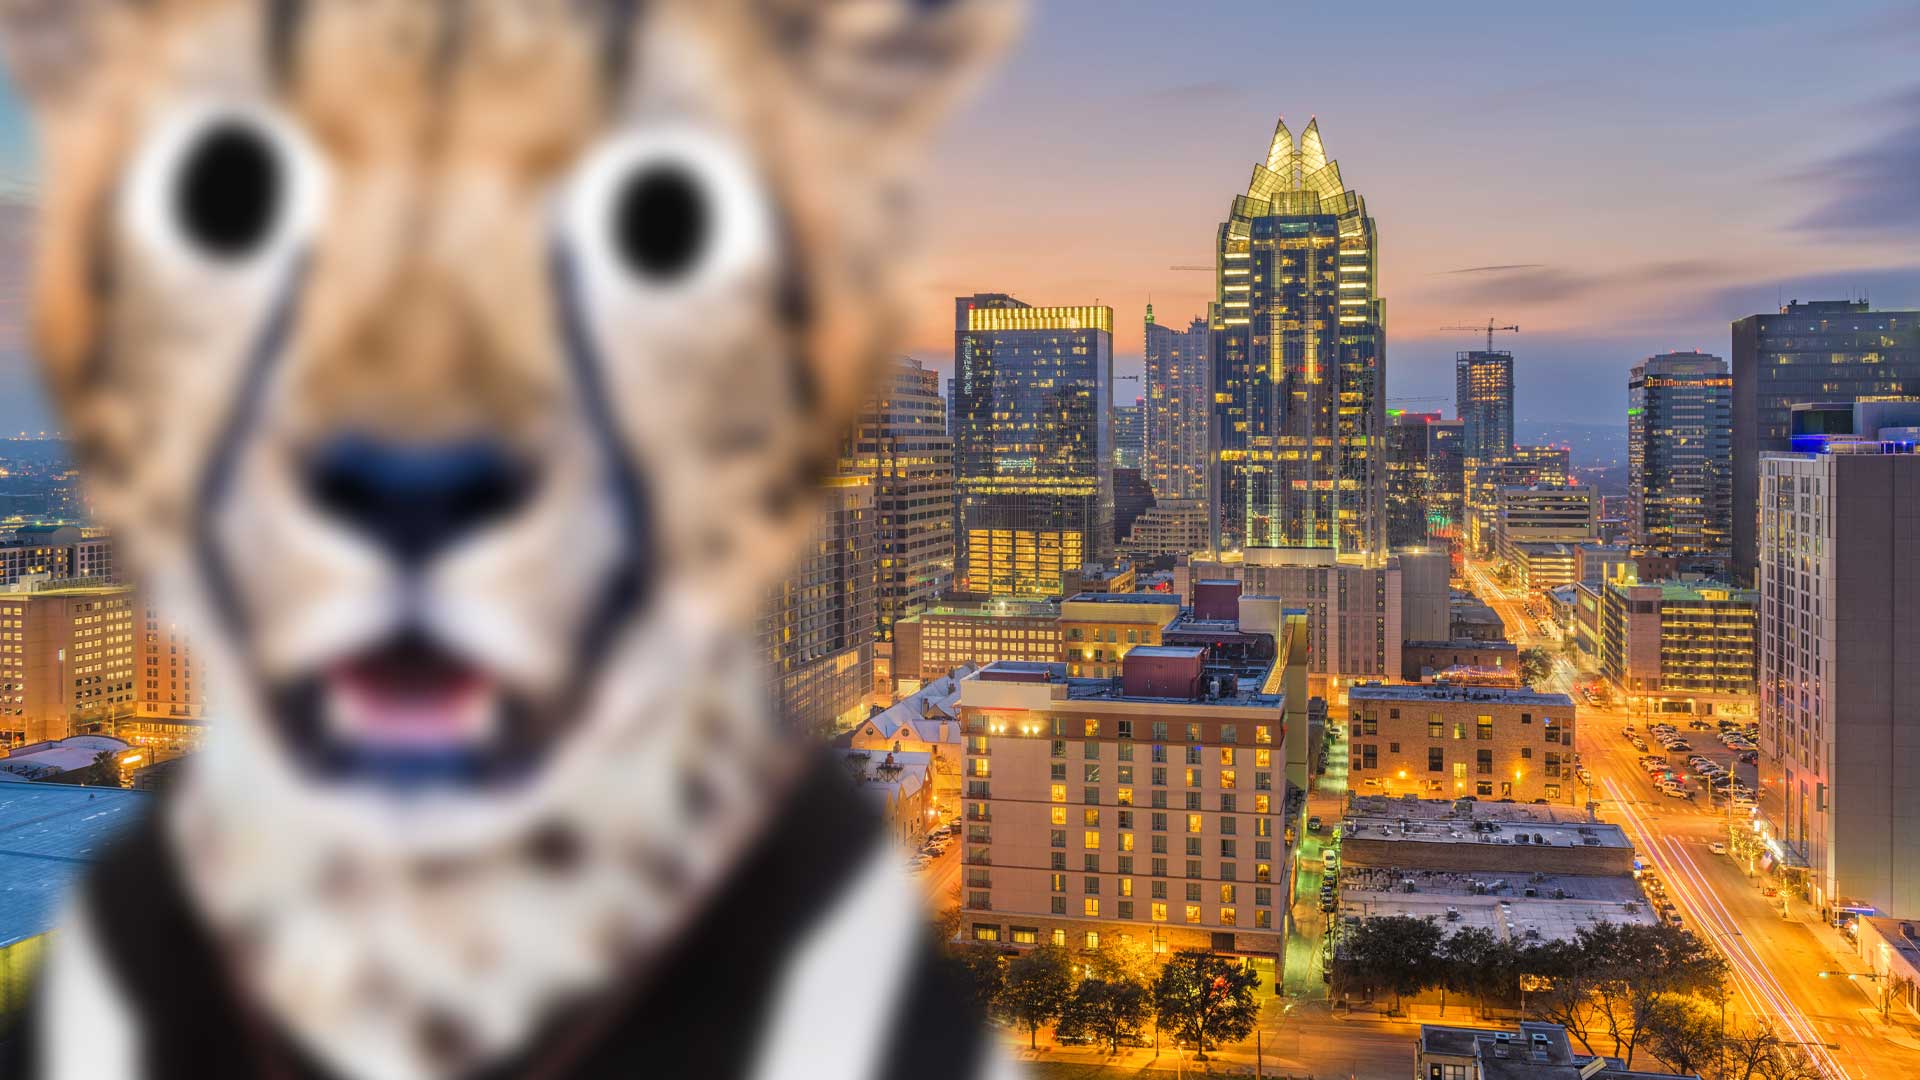 Downtown Austin with a big cat in the foreground